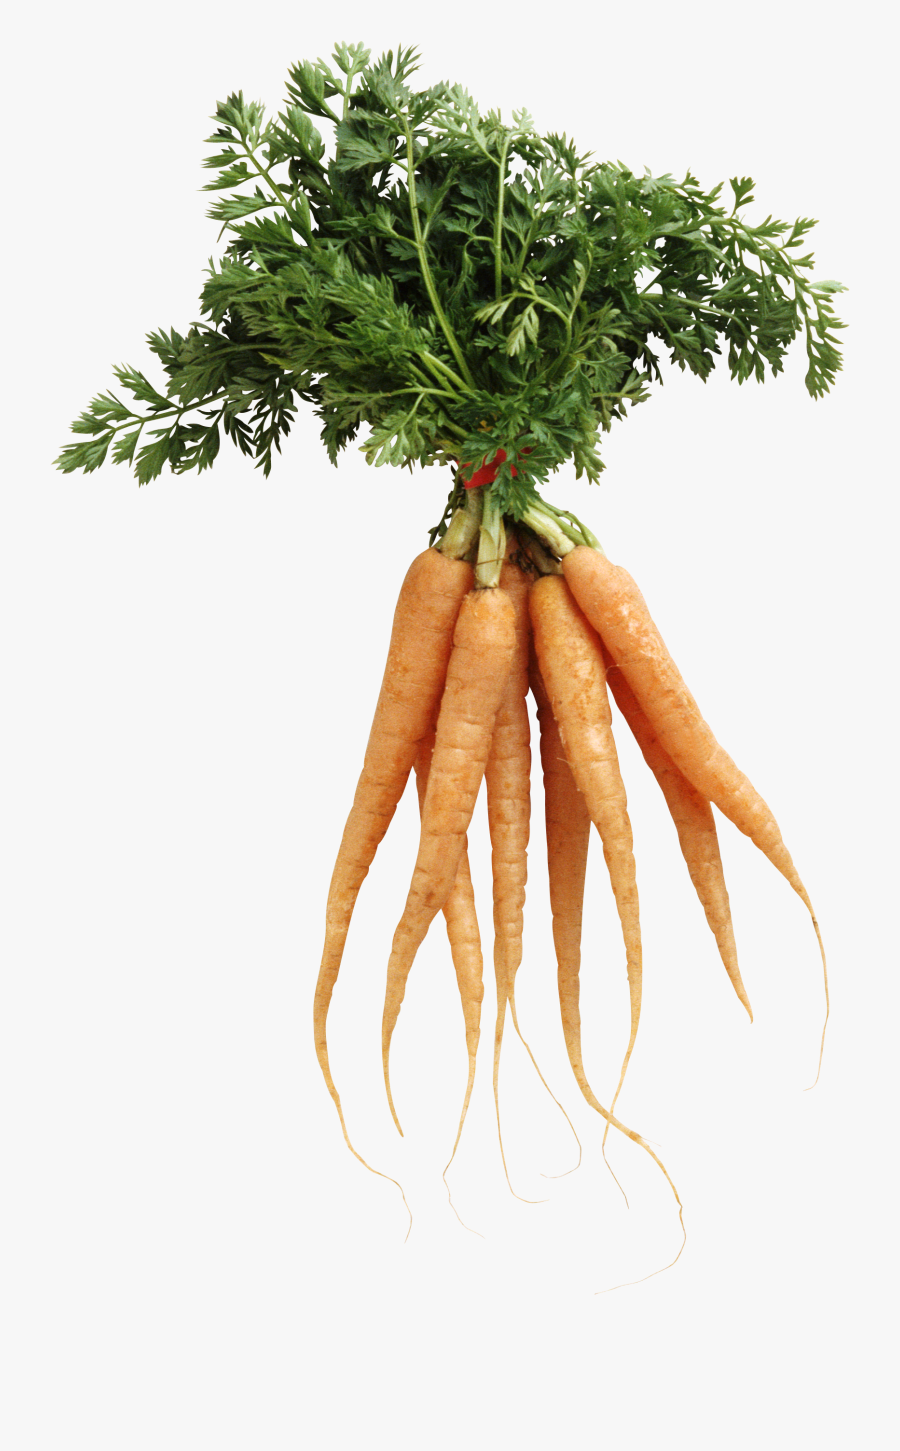 Carrot Png Image - Carrots With No Background, Transparent Clipart